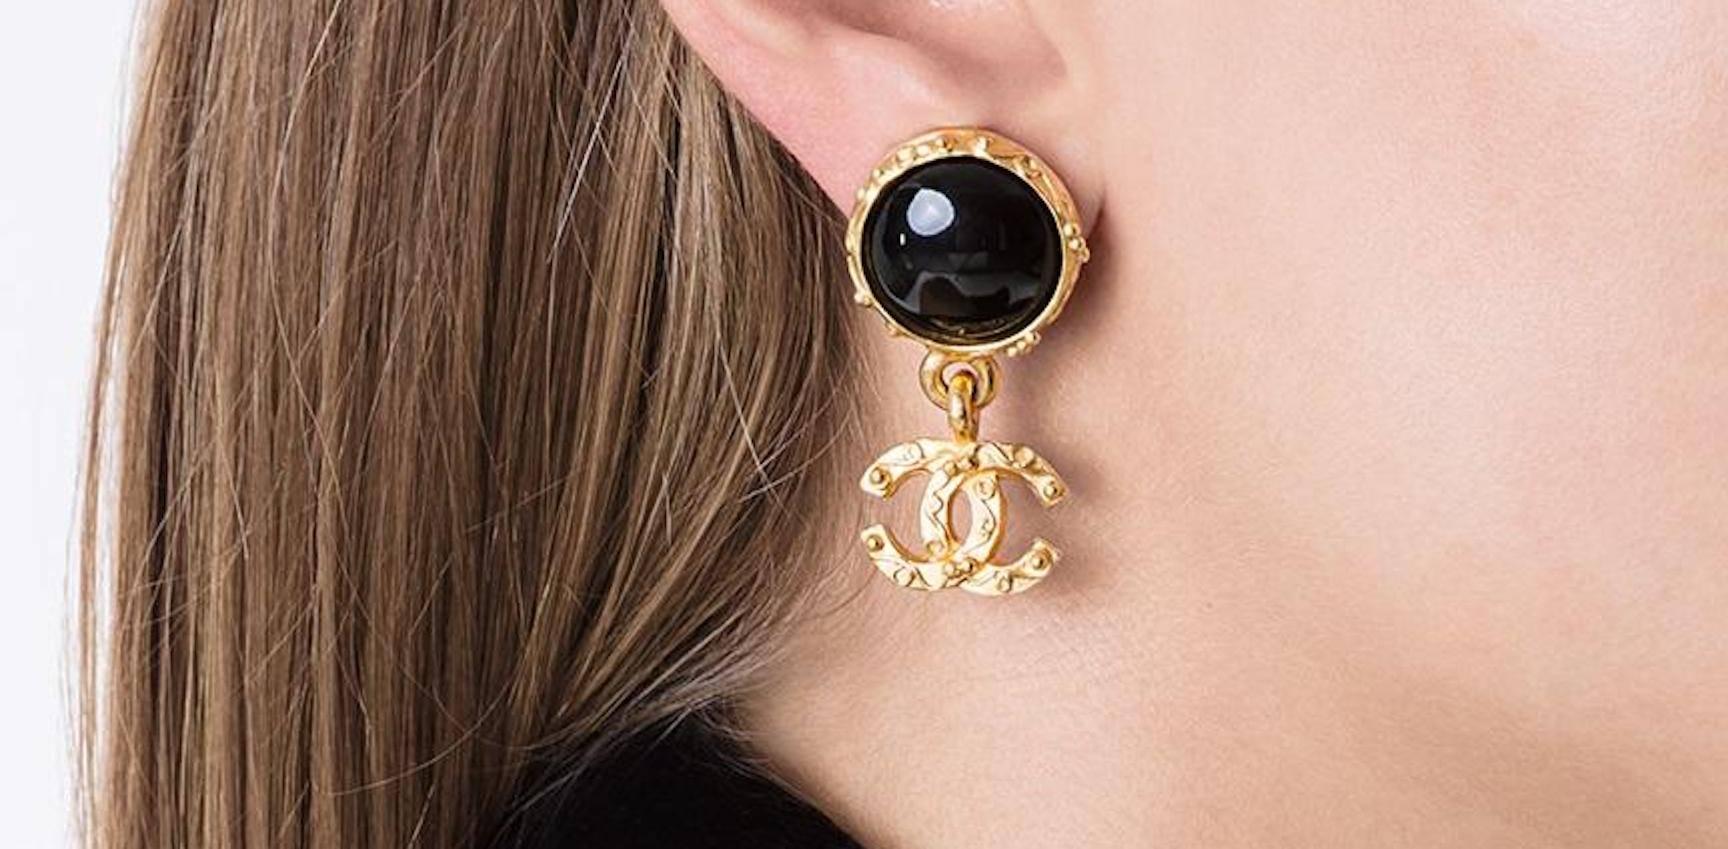 Chanel Vintage Black Round Button Gold Charm Evening Dangle Drop Earrings

Metal
Gold tone
Clip on closure
Made in France
Width ~1"
Drop 1.5"